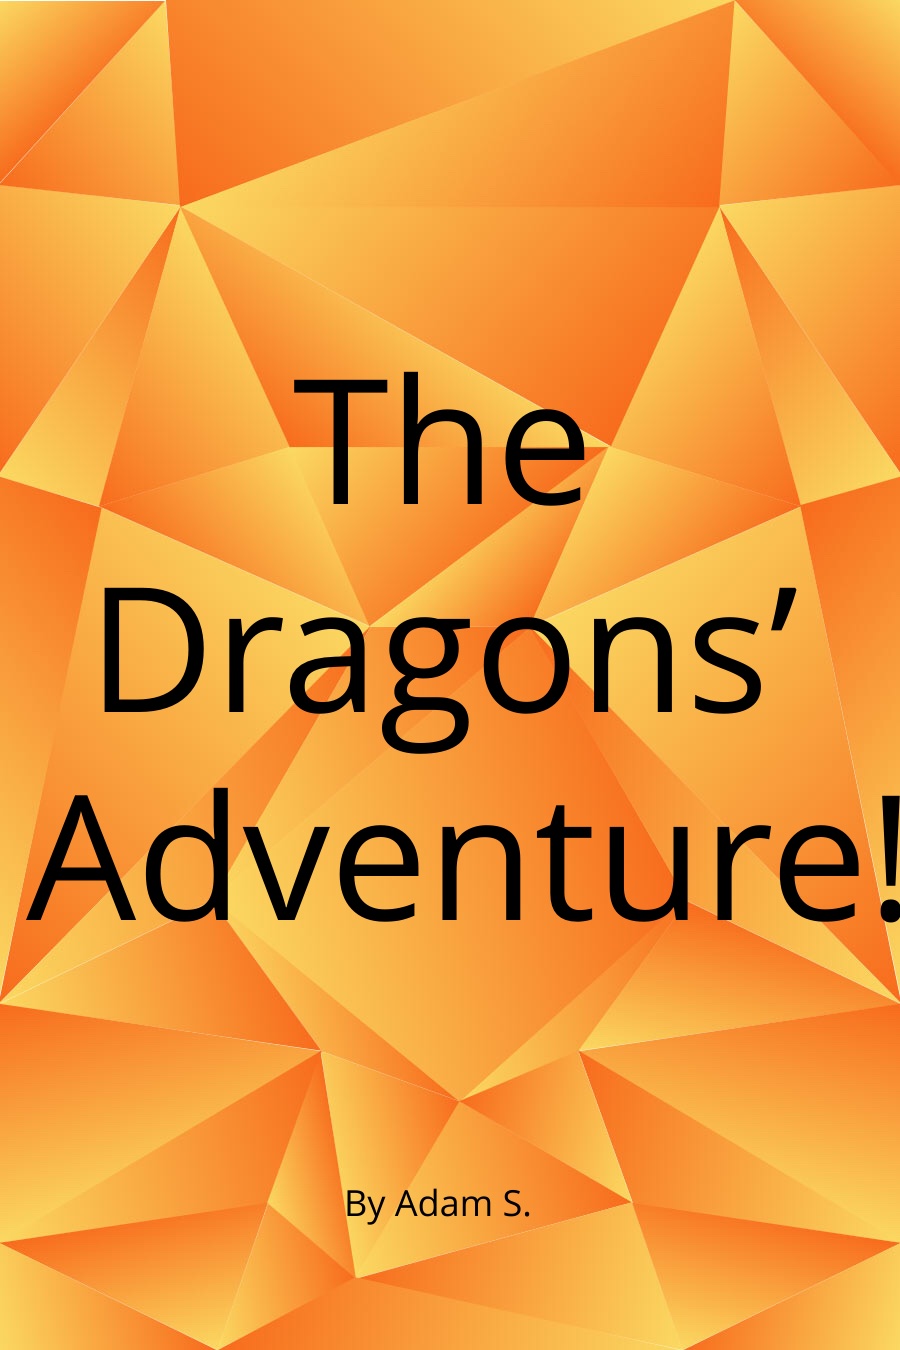 The Dragons Adventure by Adam S